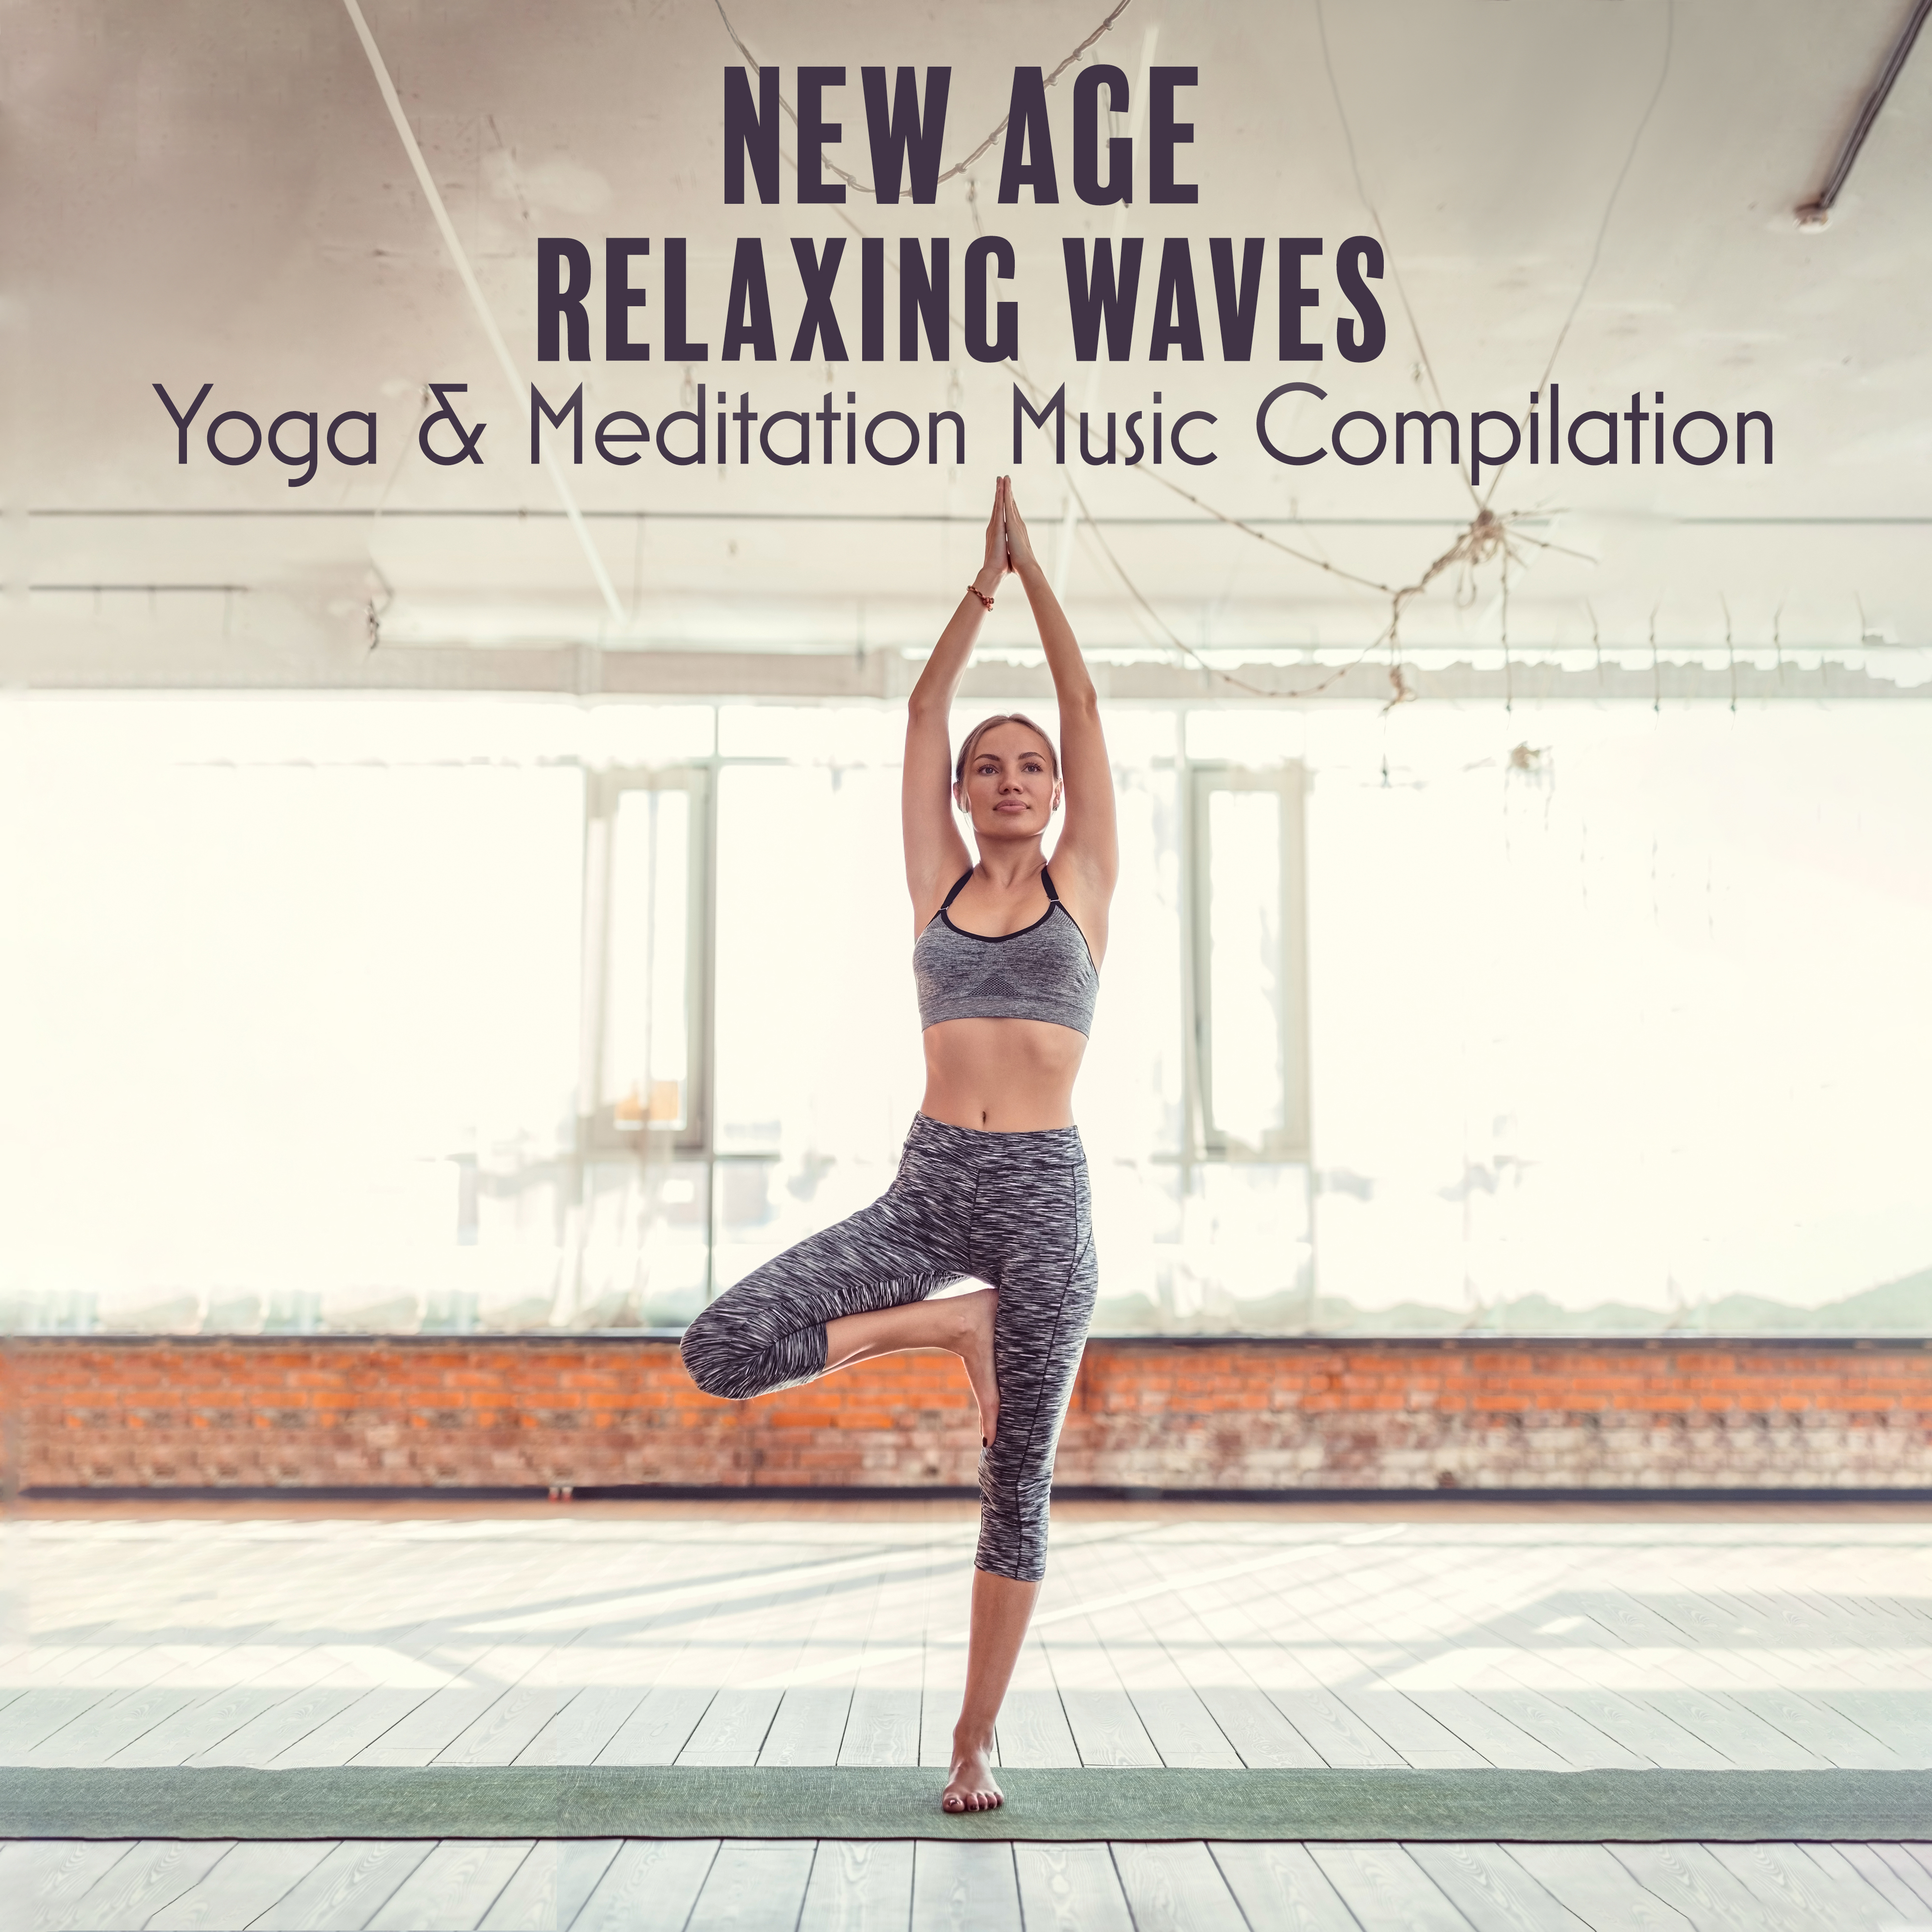 New Age Relaxing Waves – Yoga & Meditation Music Compilation